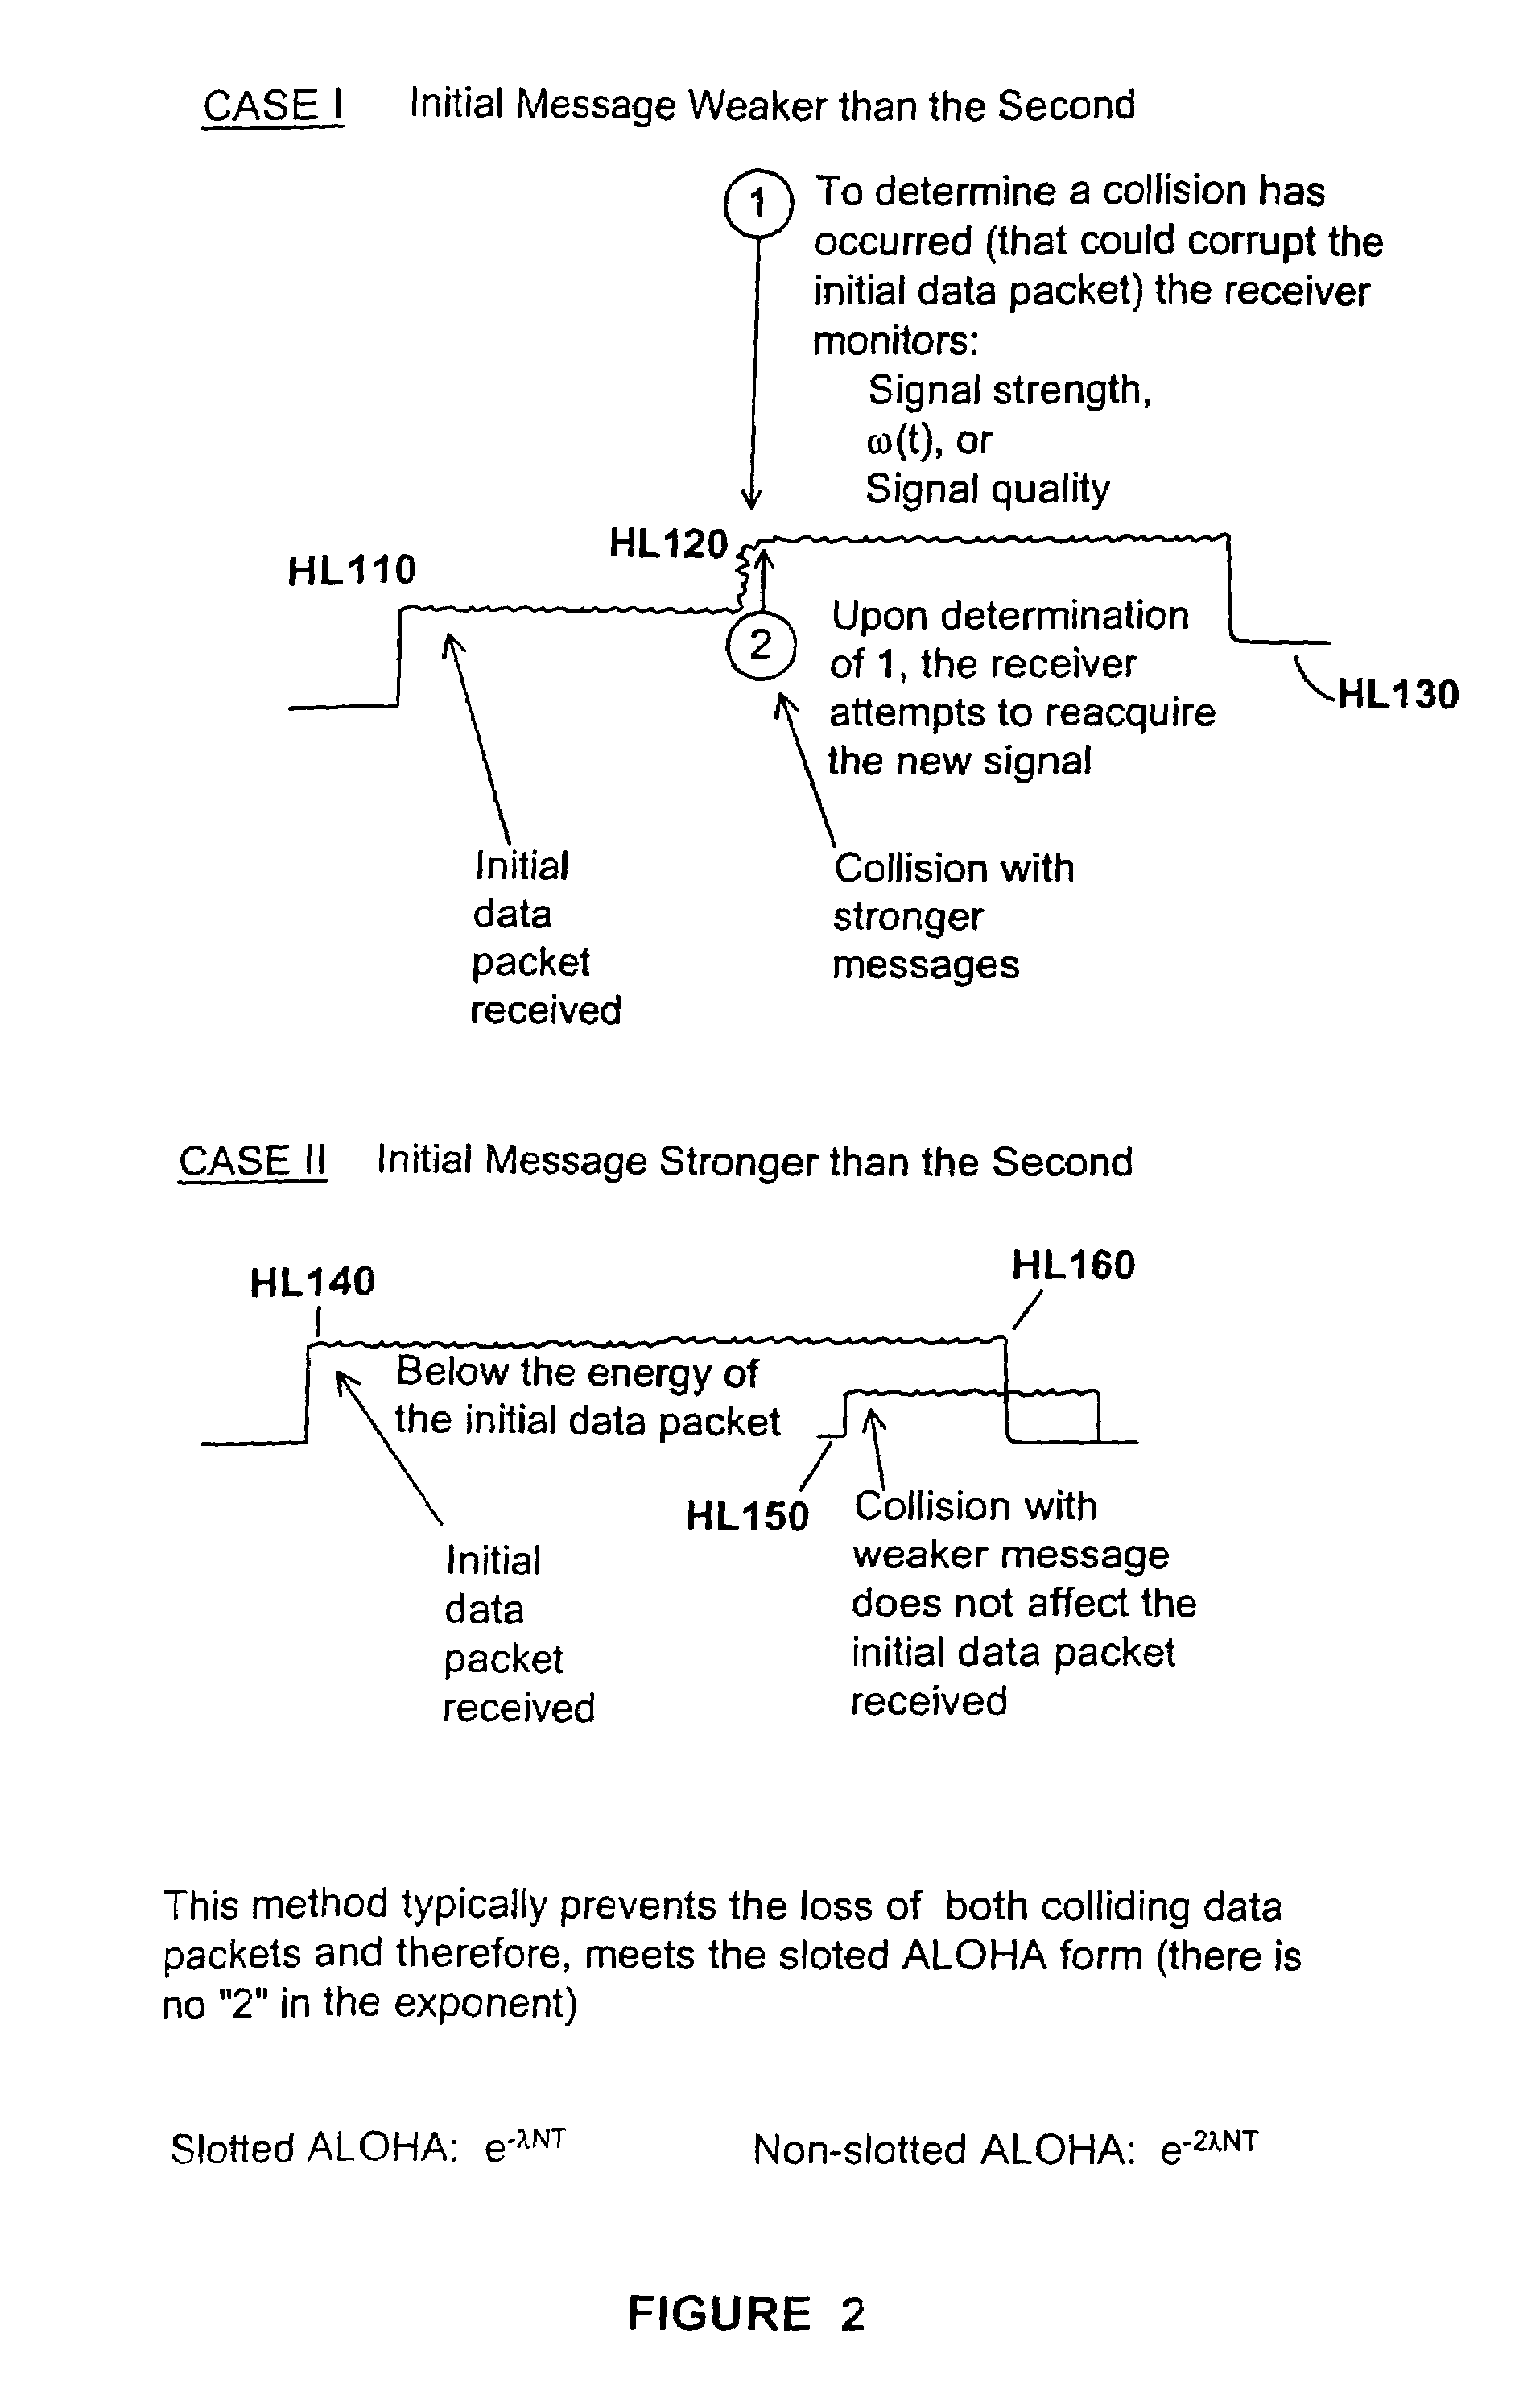 Enhanced wireless packet data communication system, method, and apparatus applicable to both wide area networks and local area networks